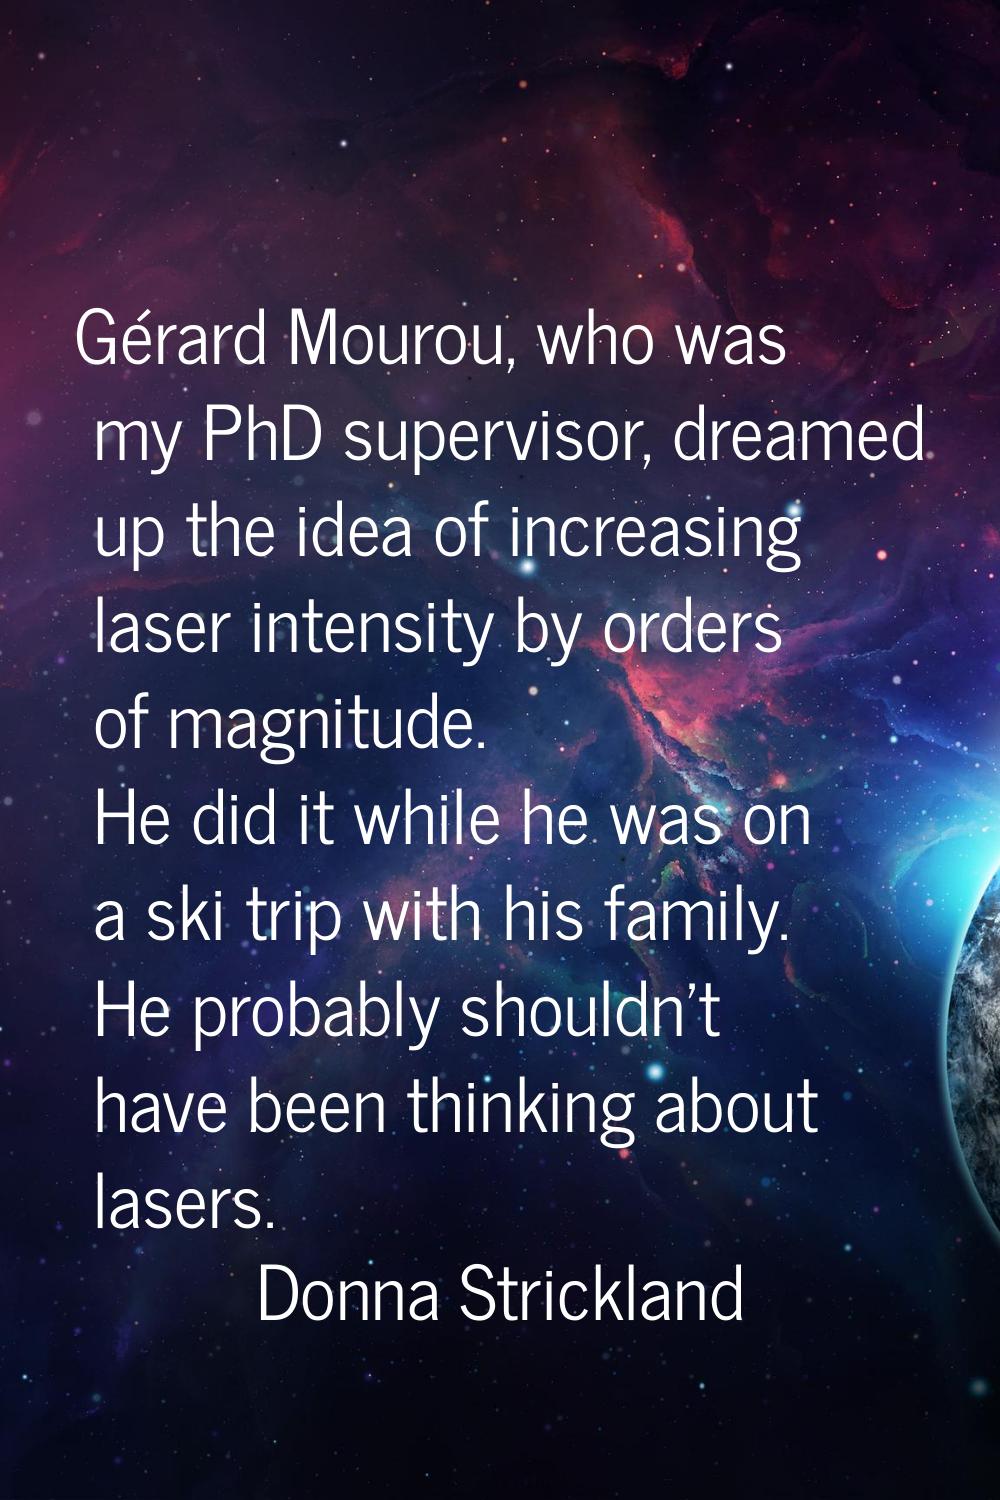 Gérard Mourou, who was my PhD supervisor, dreamed up the idea of increasing laser intensity by orde